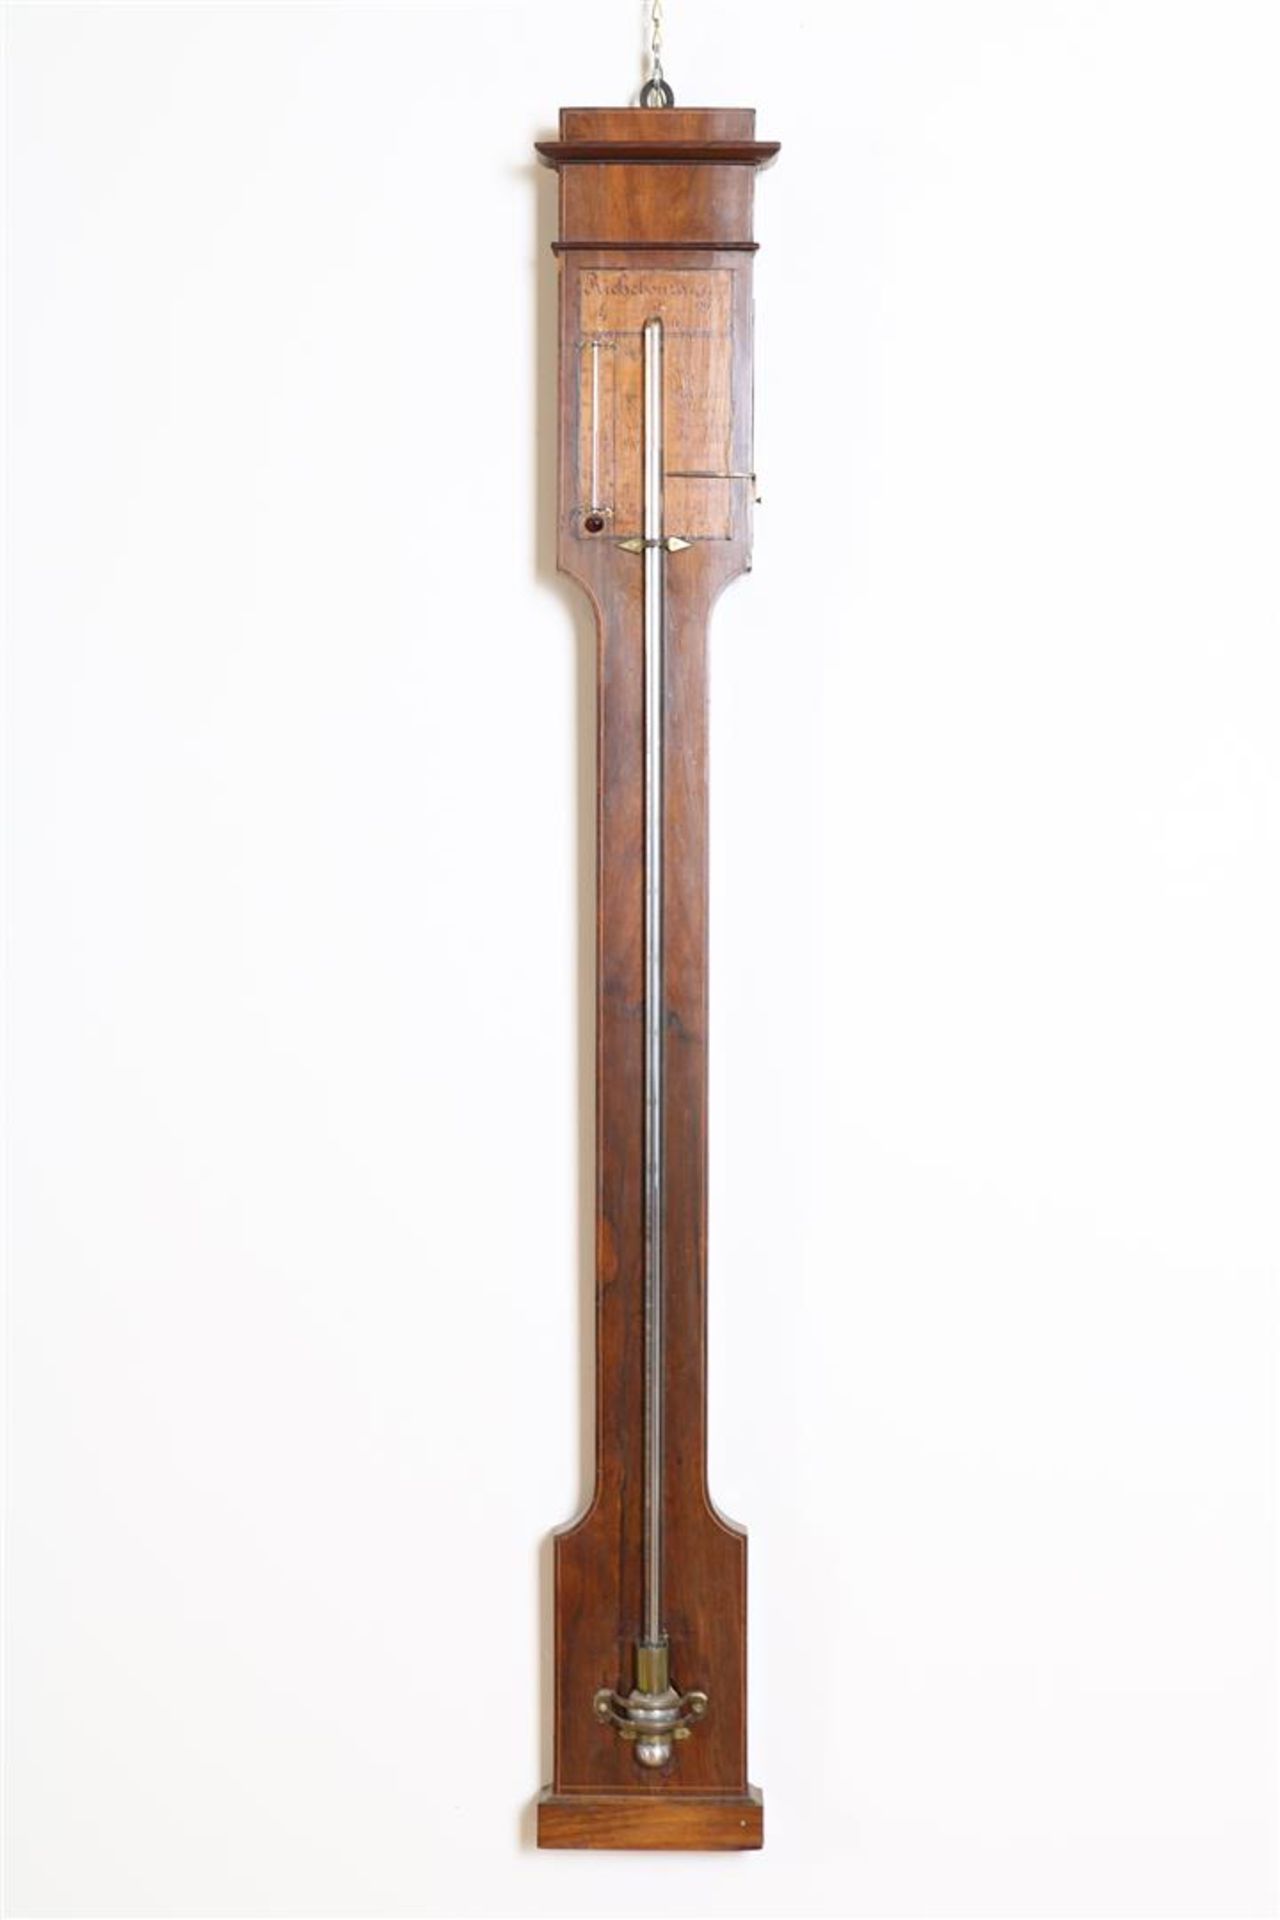 Stick barometer with mercury barometer, mercury thermometer and painted scale plate, address